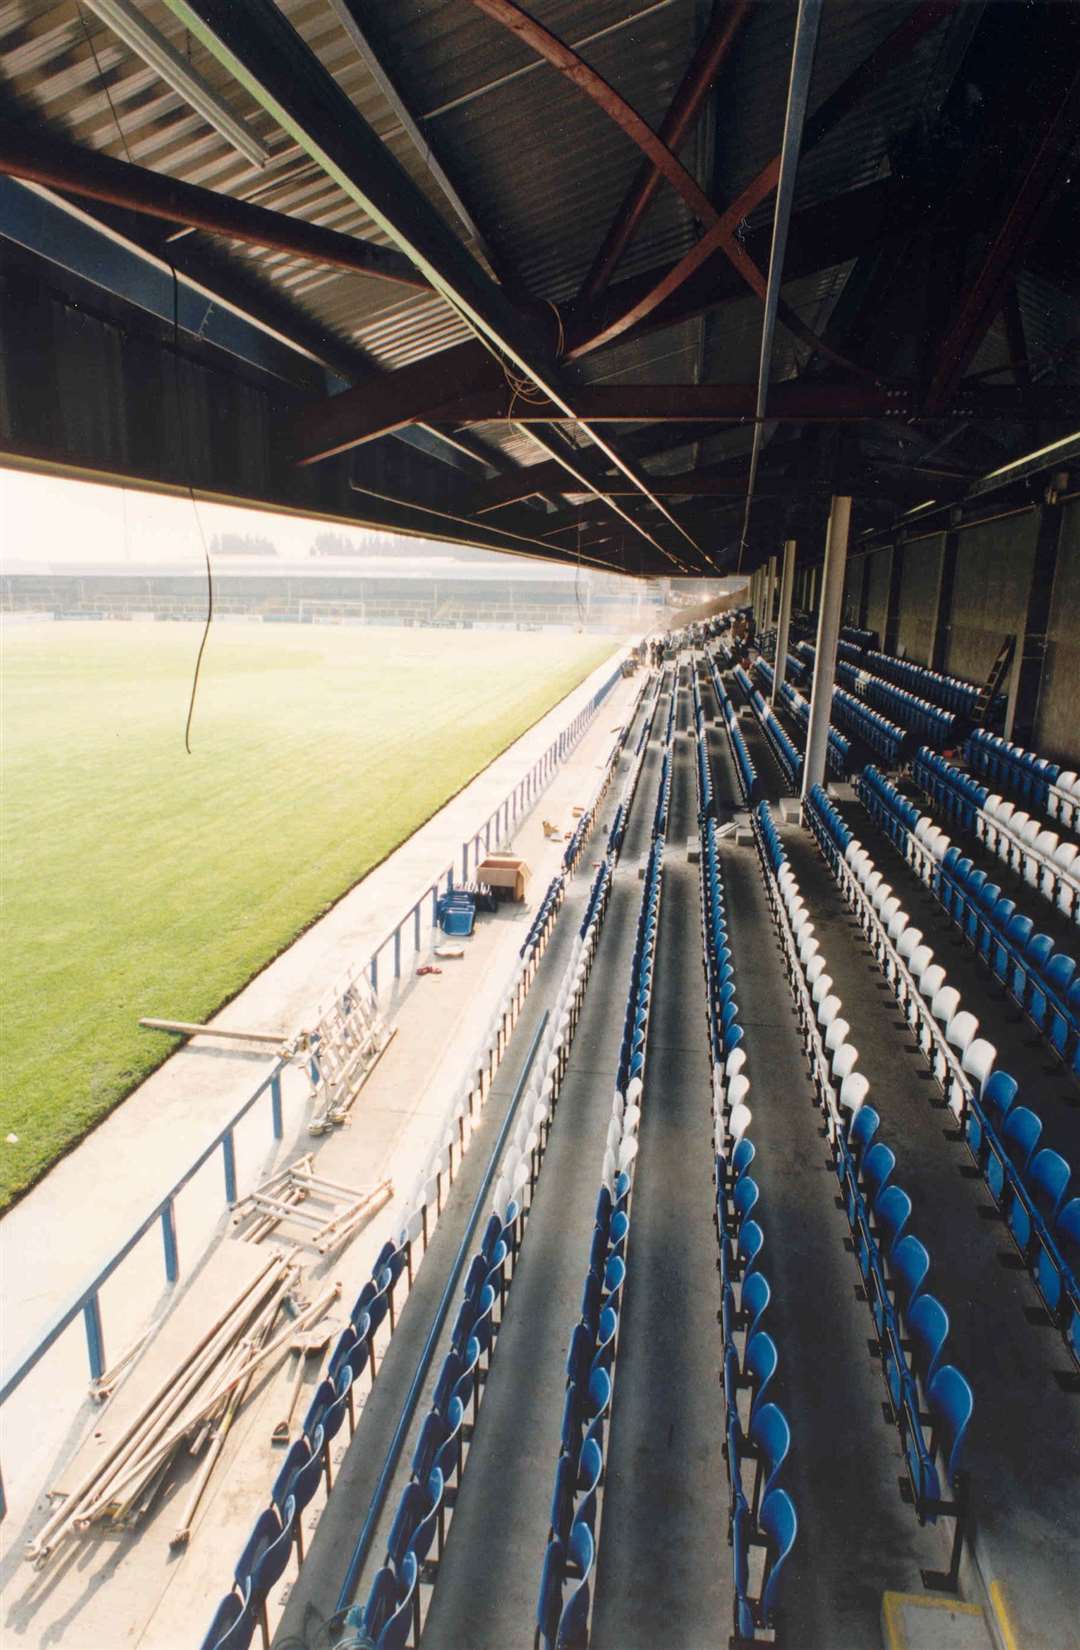 Gillingham's new Gordon Road Stand under construction in 1997 – note the old Rainham End terrace in the background